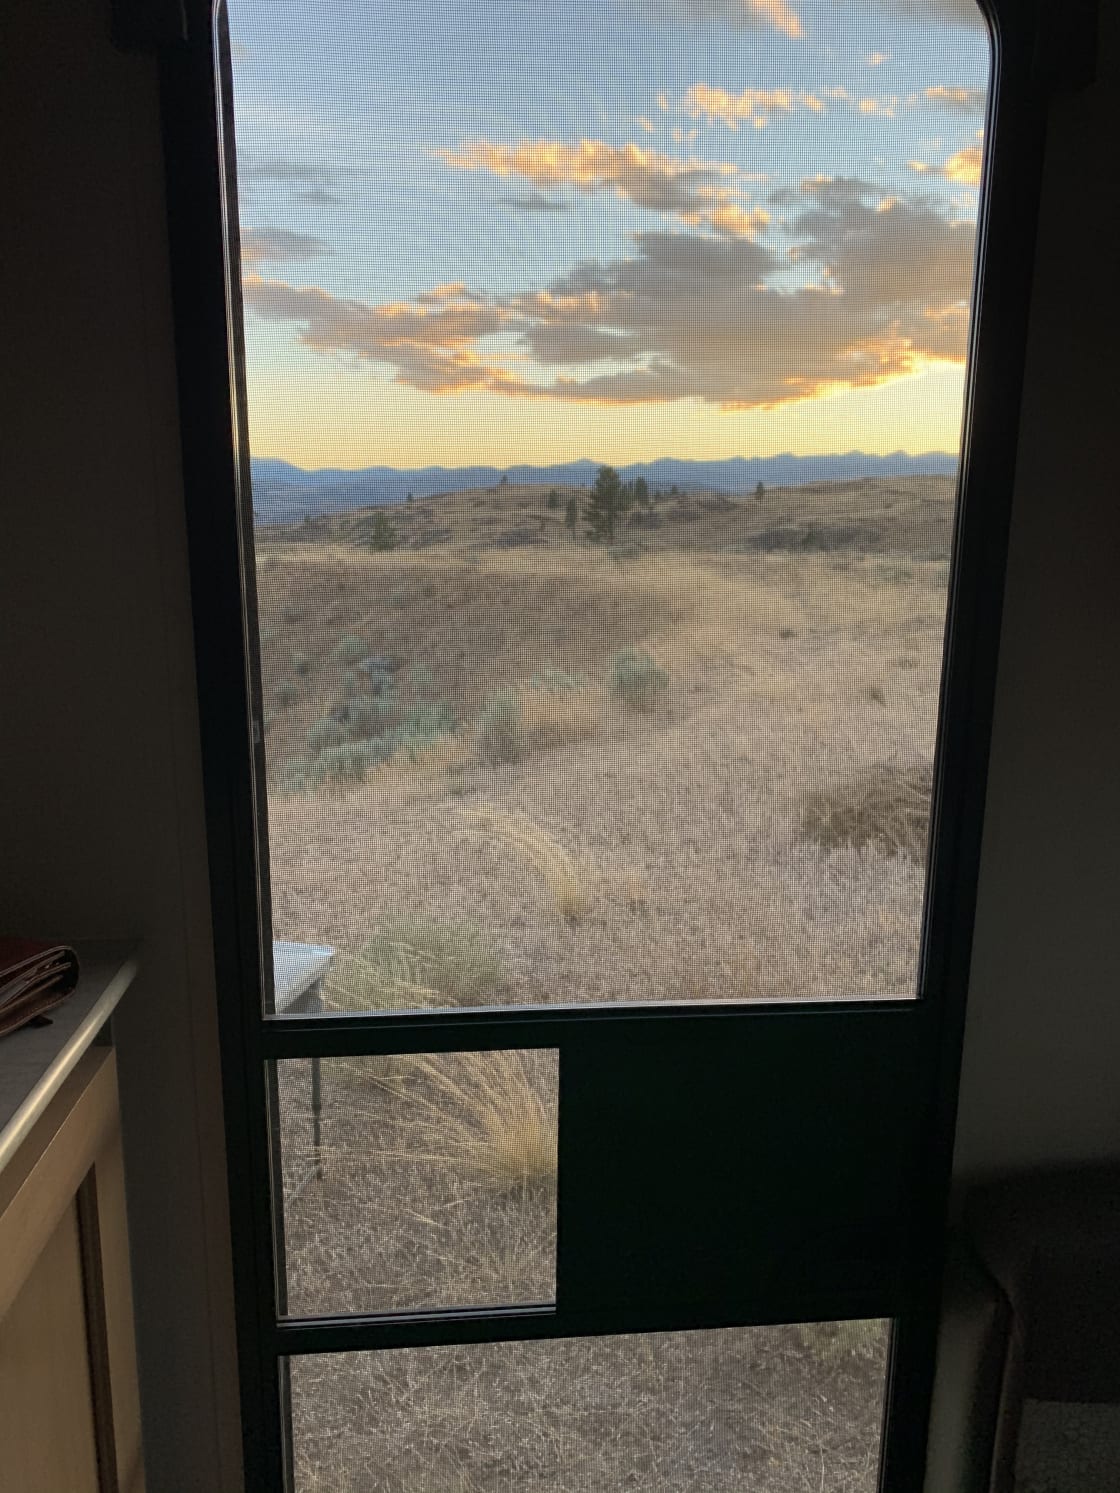 View from inside our trailer